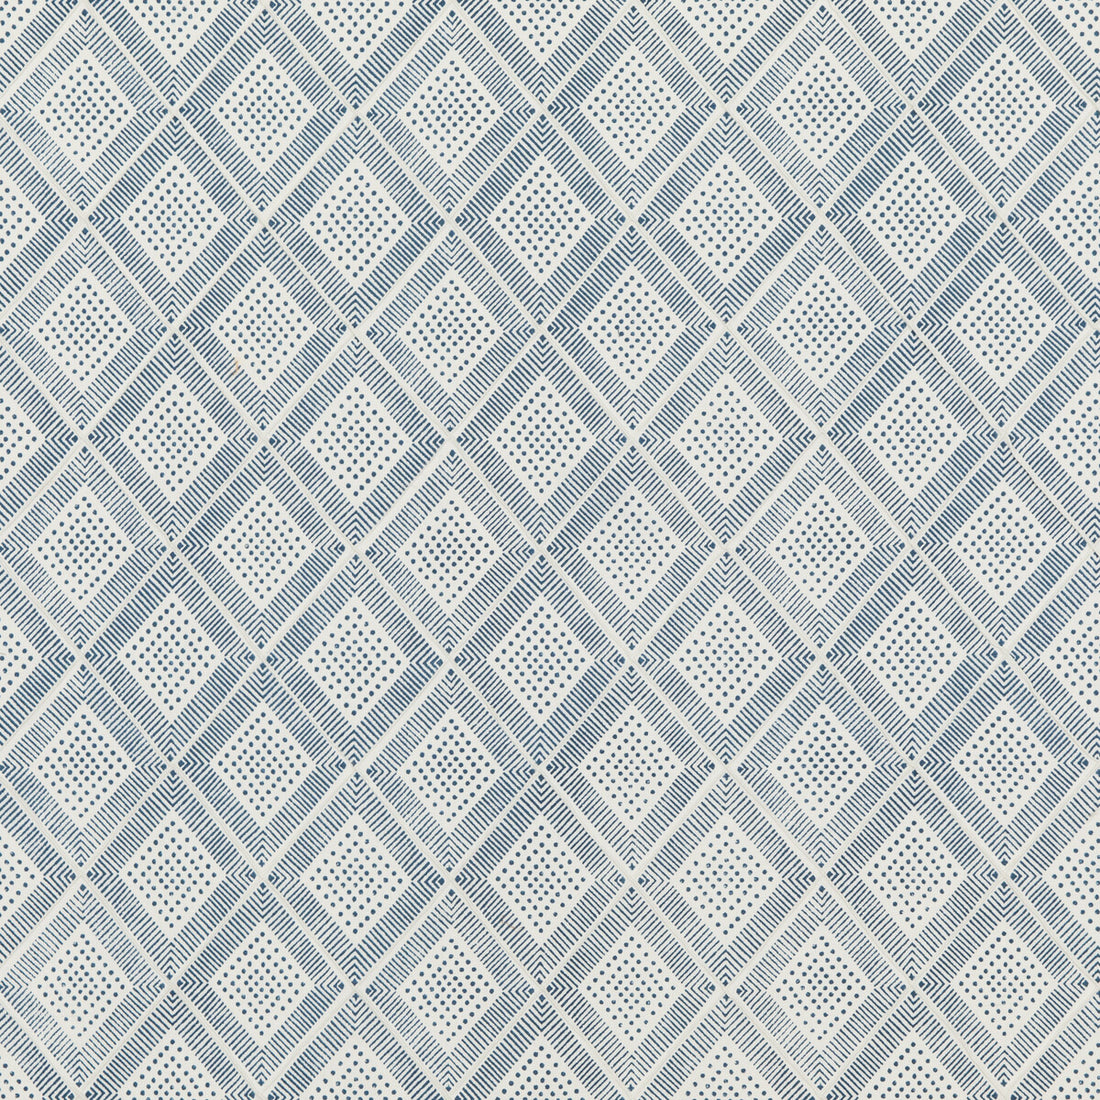 Block Trellis fabric in indigo color - pattern PP50484.1.0 - by Baker Lifestyle in the Block Party collection